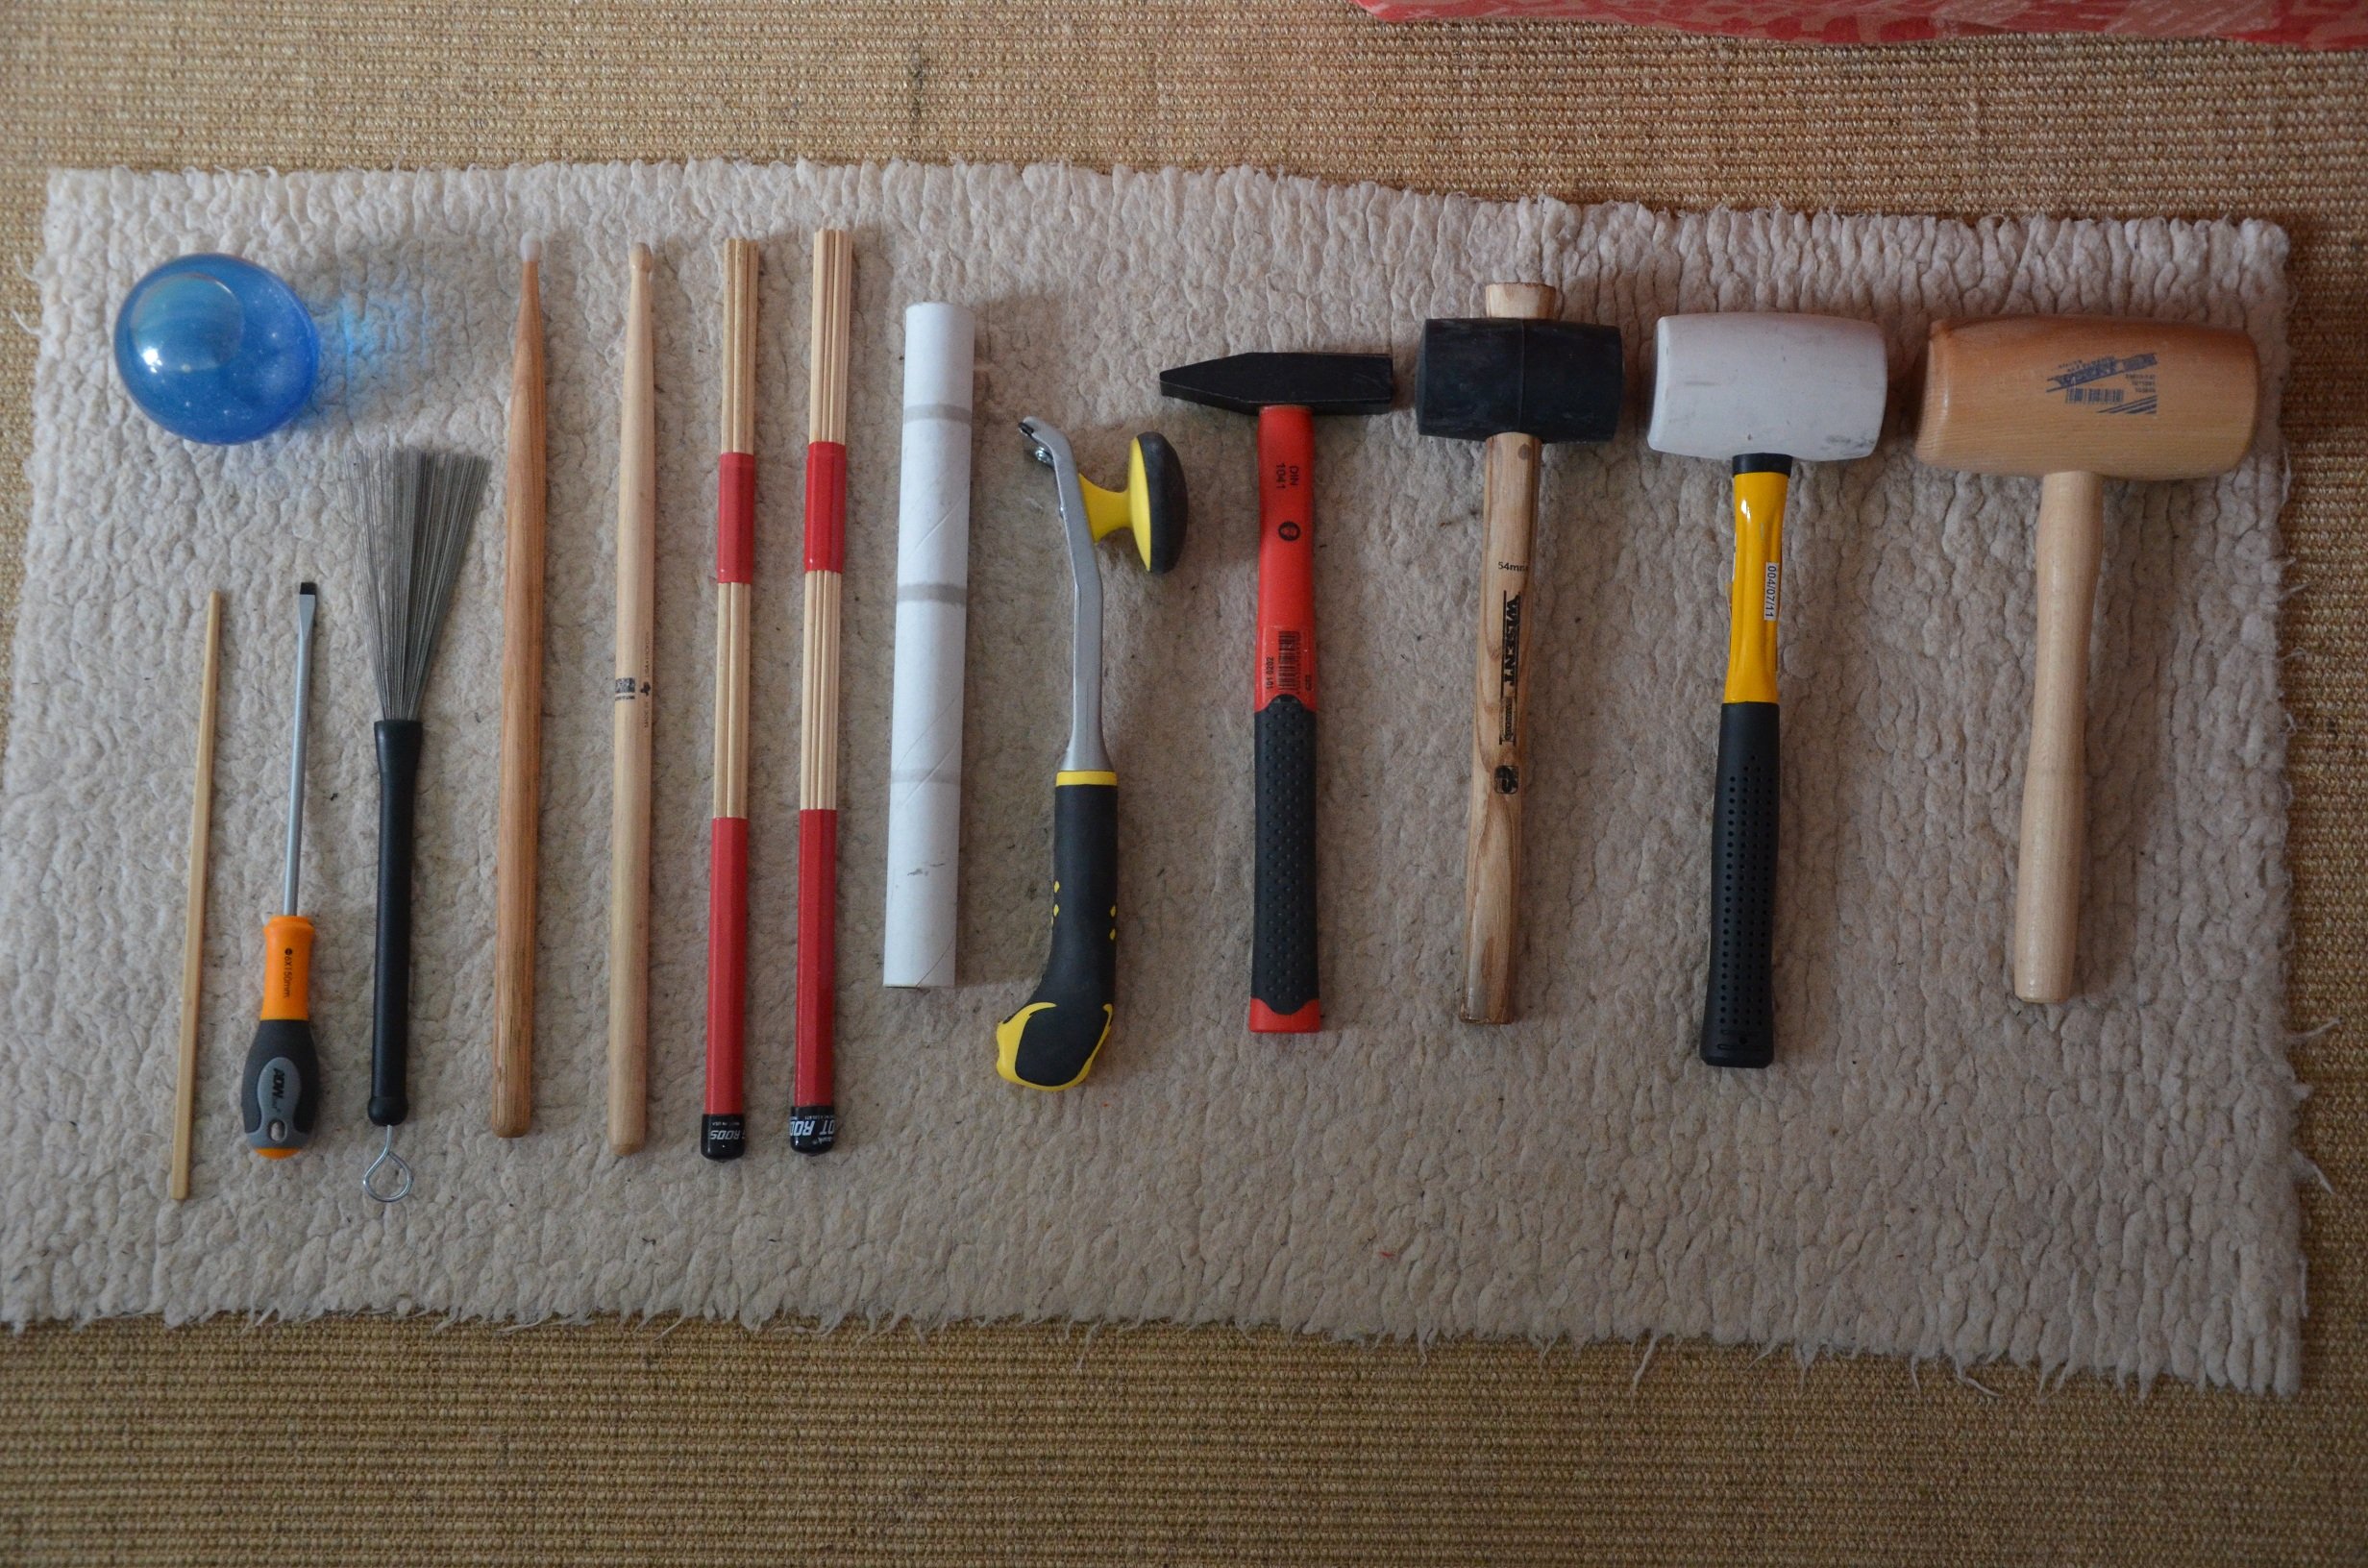 some of Paul Maurer's "Striking Tools" for percussion design